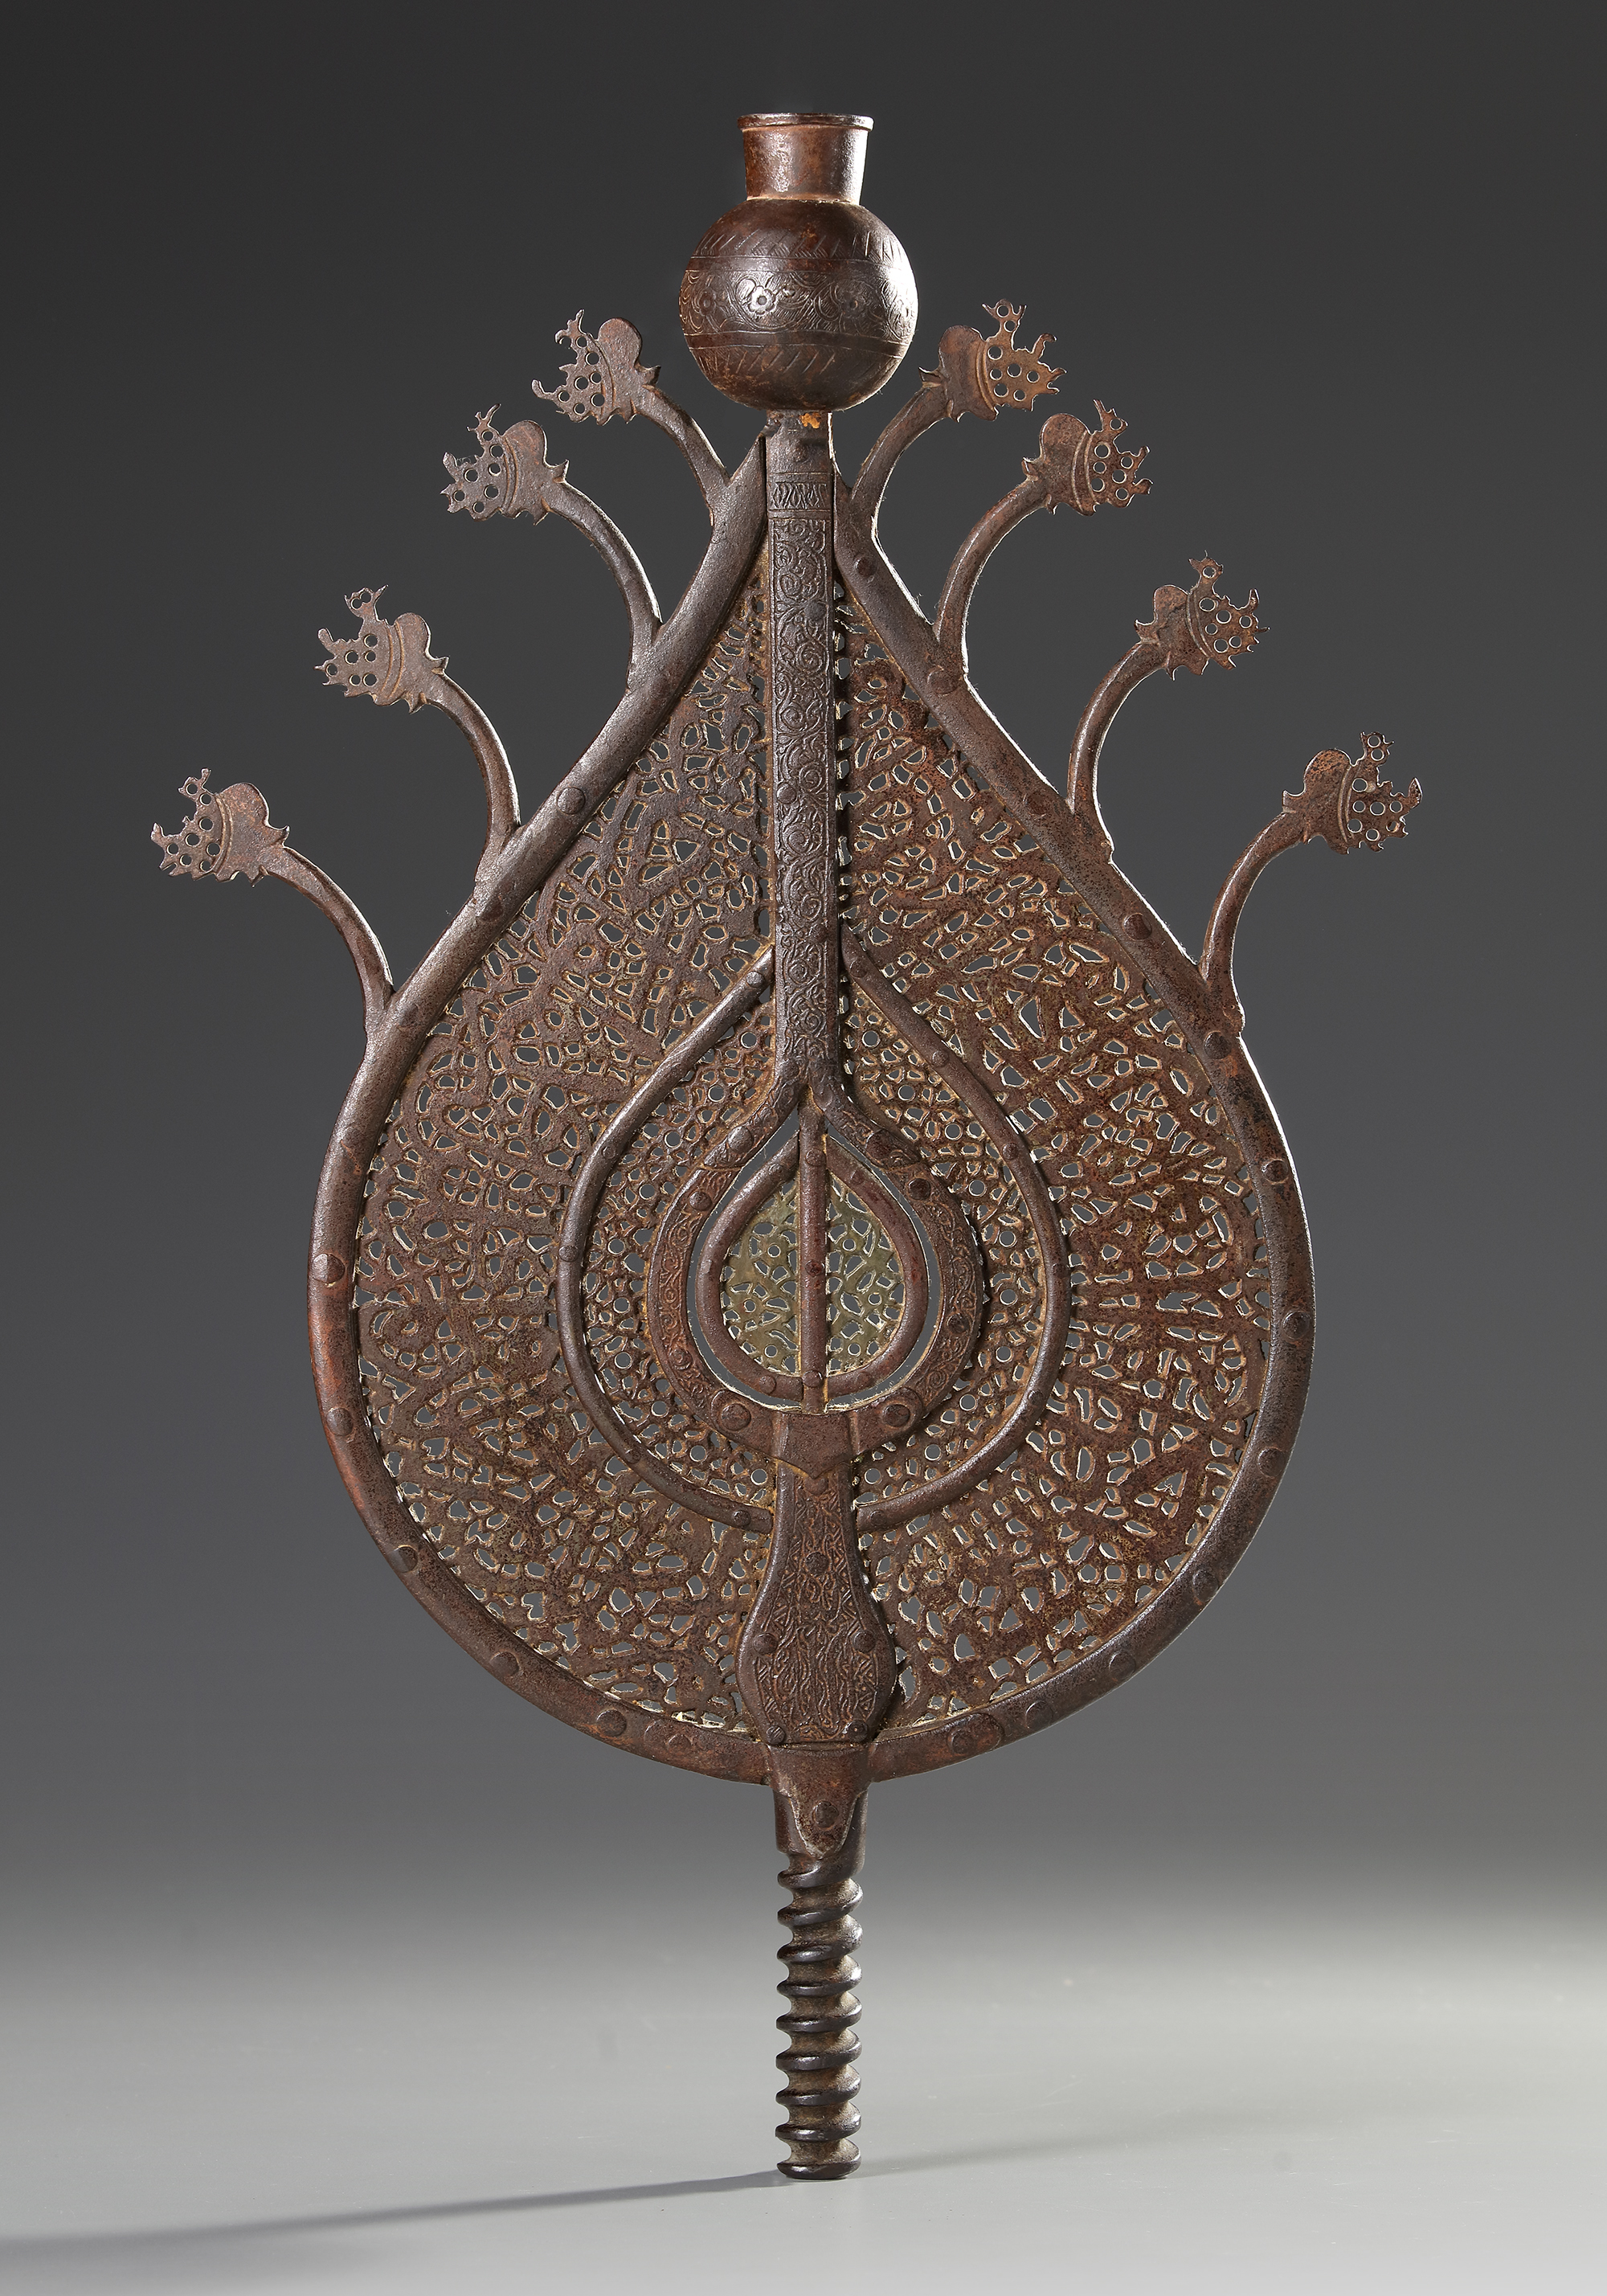 AN EARLY SAFAVID PIERCED BRONZE PROCESSIONAL STANDARD (ALAM), PERSIA, DATED 924 AH/1518 AD - Image 2 of 4